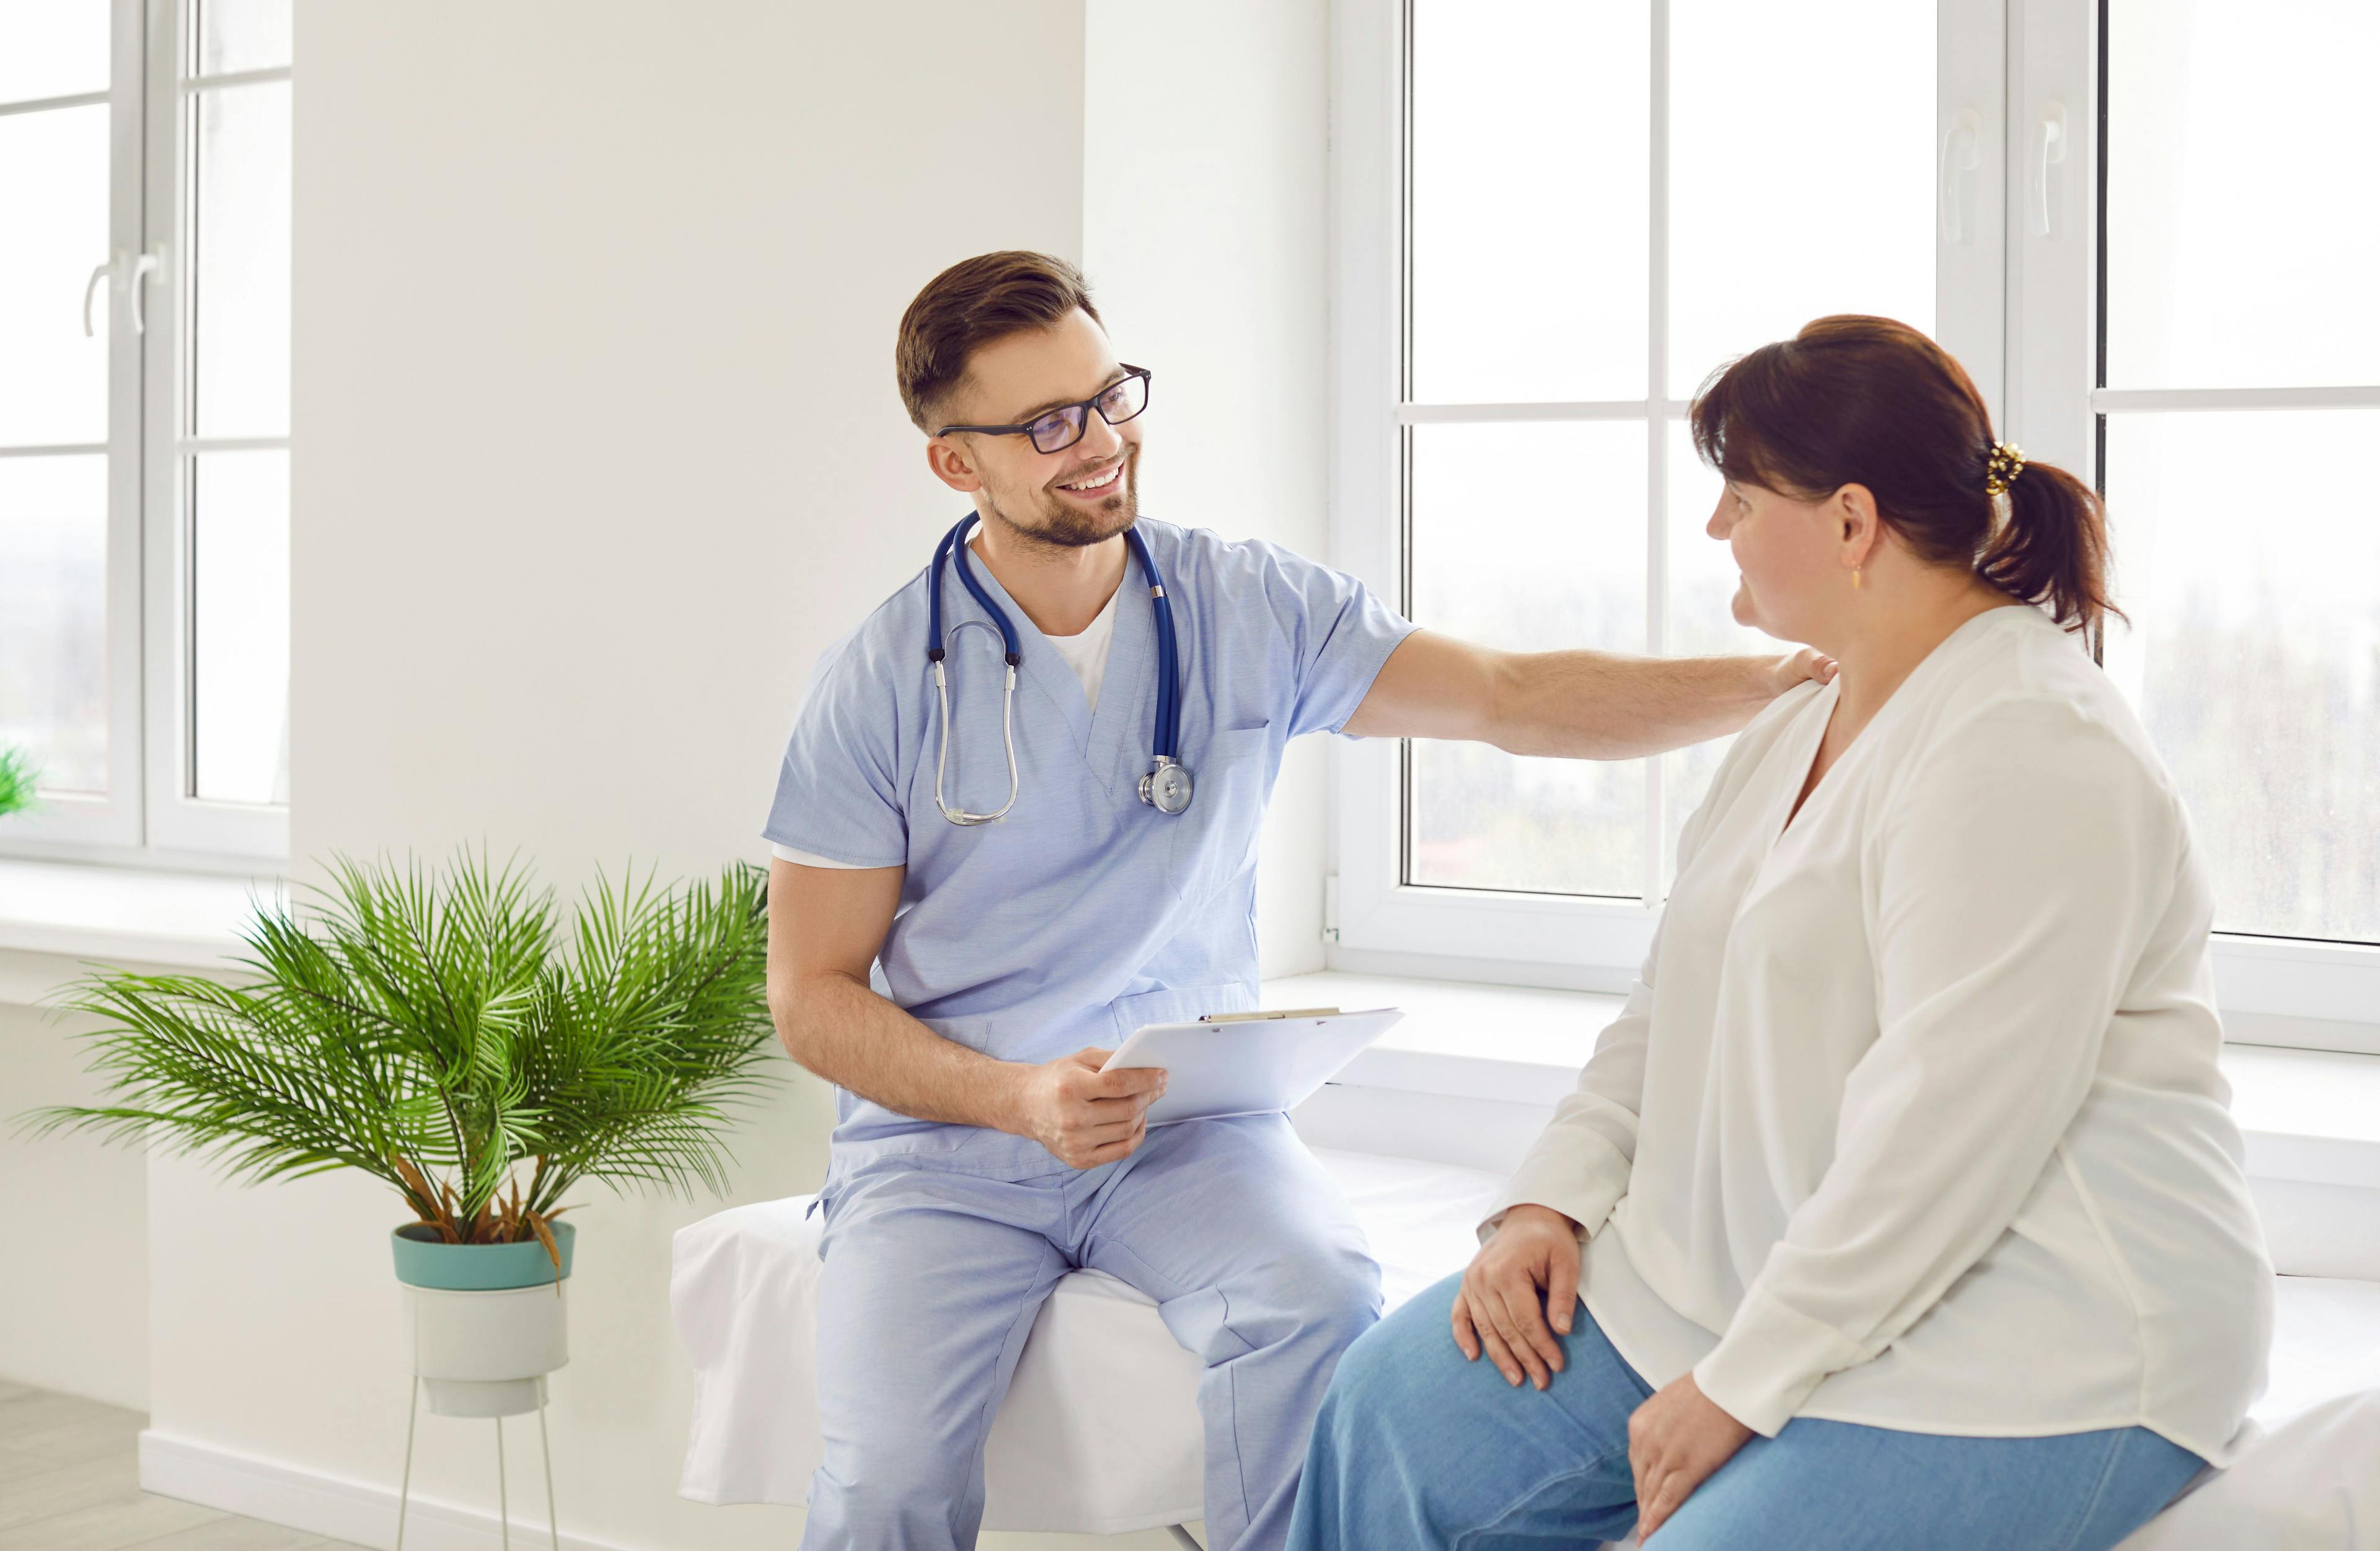 obese woman talking to doctor | Image credit: Studio Romantic - stock.adobe.com